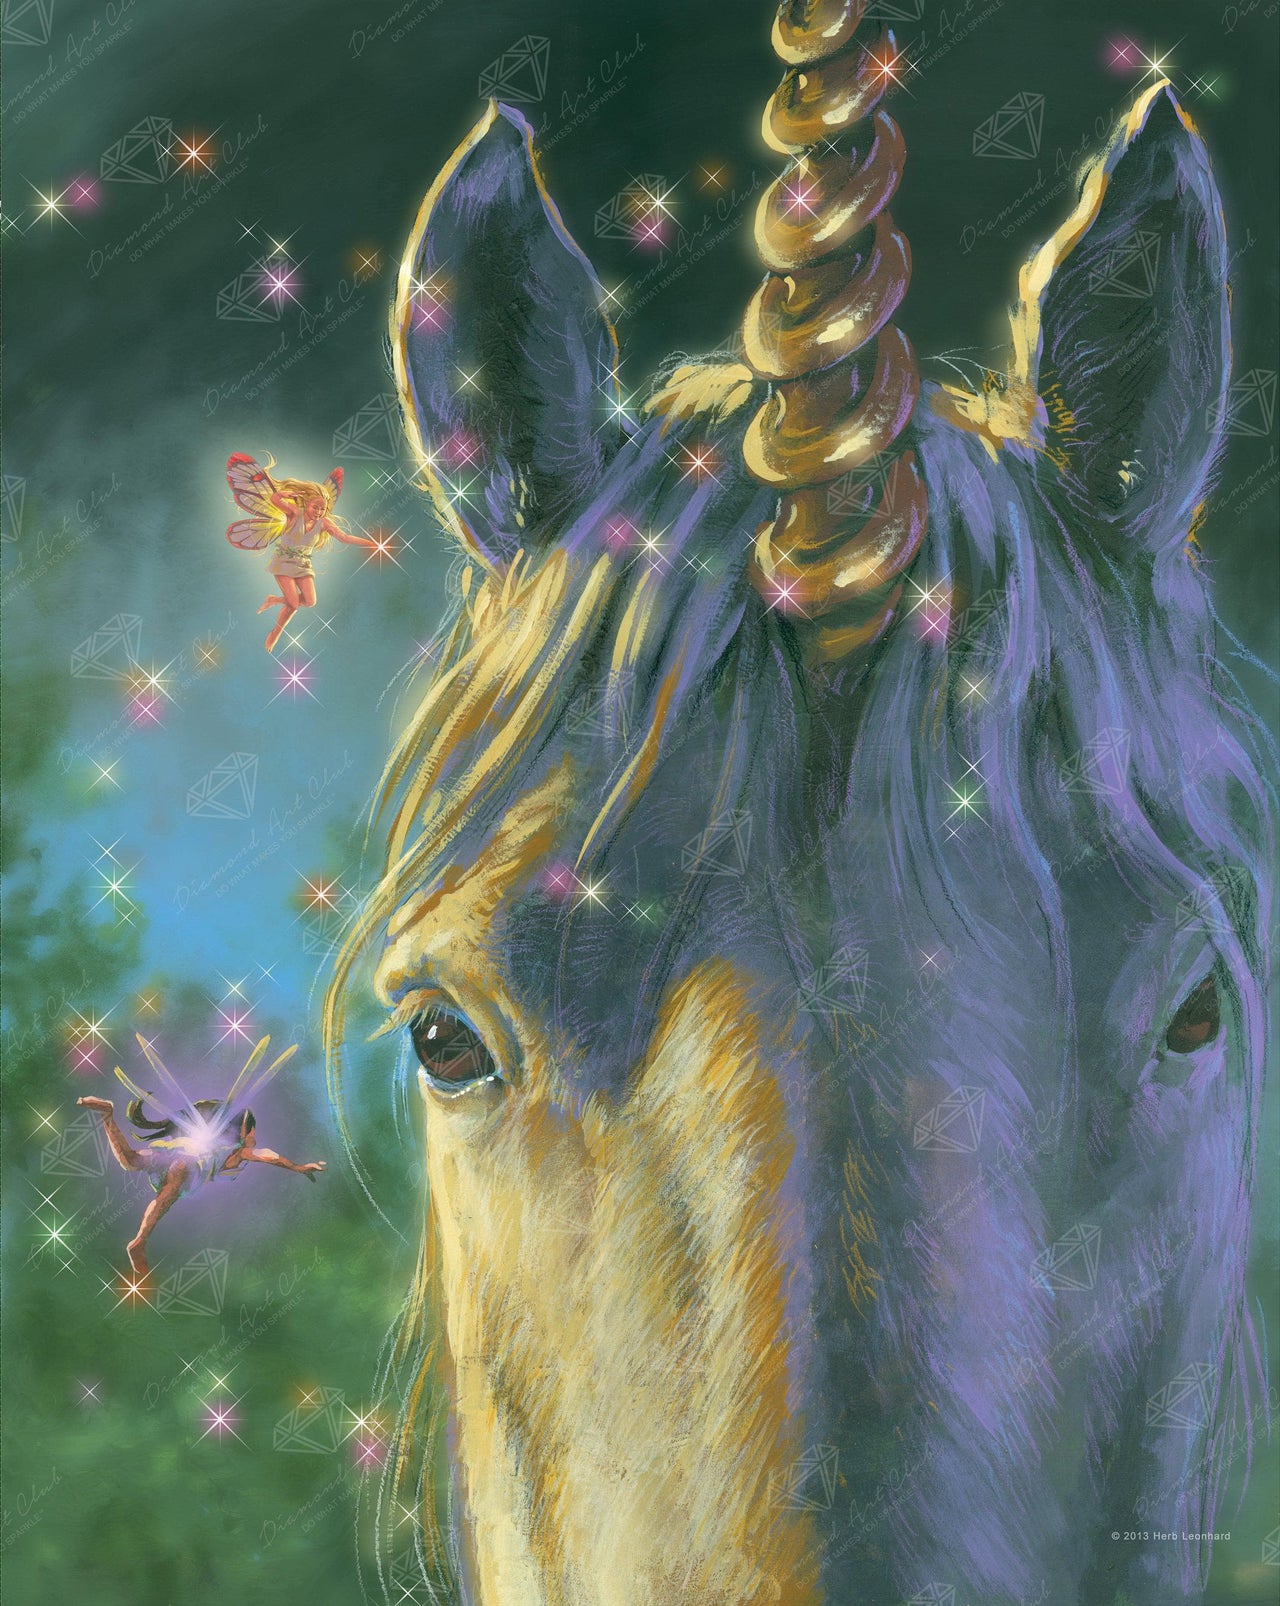 Diamond Painting Big Unicorn & Little Fairies 20" x 25" (50.8cm x 63.7cm) / Square with 51 Colors including 3 ABs / 52,224